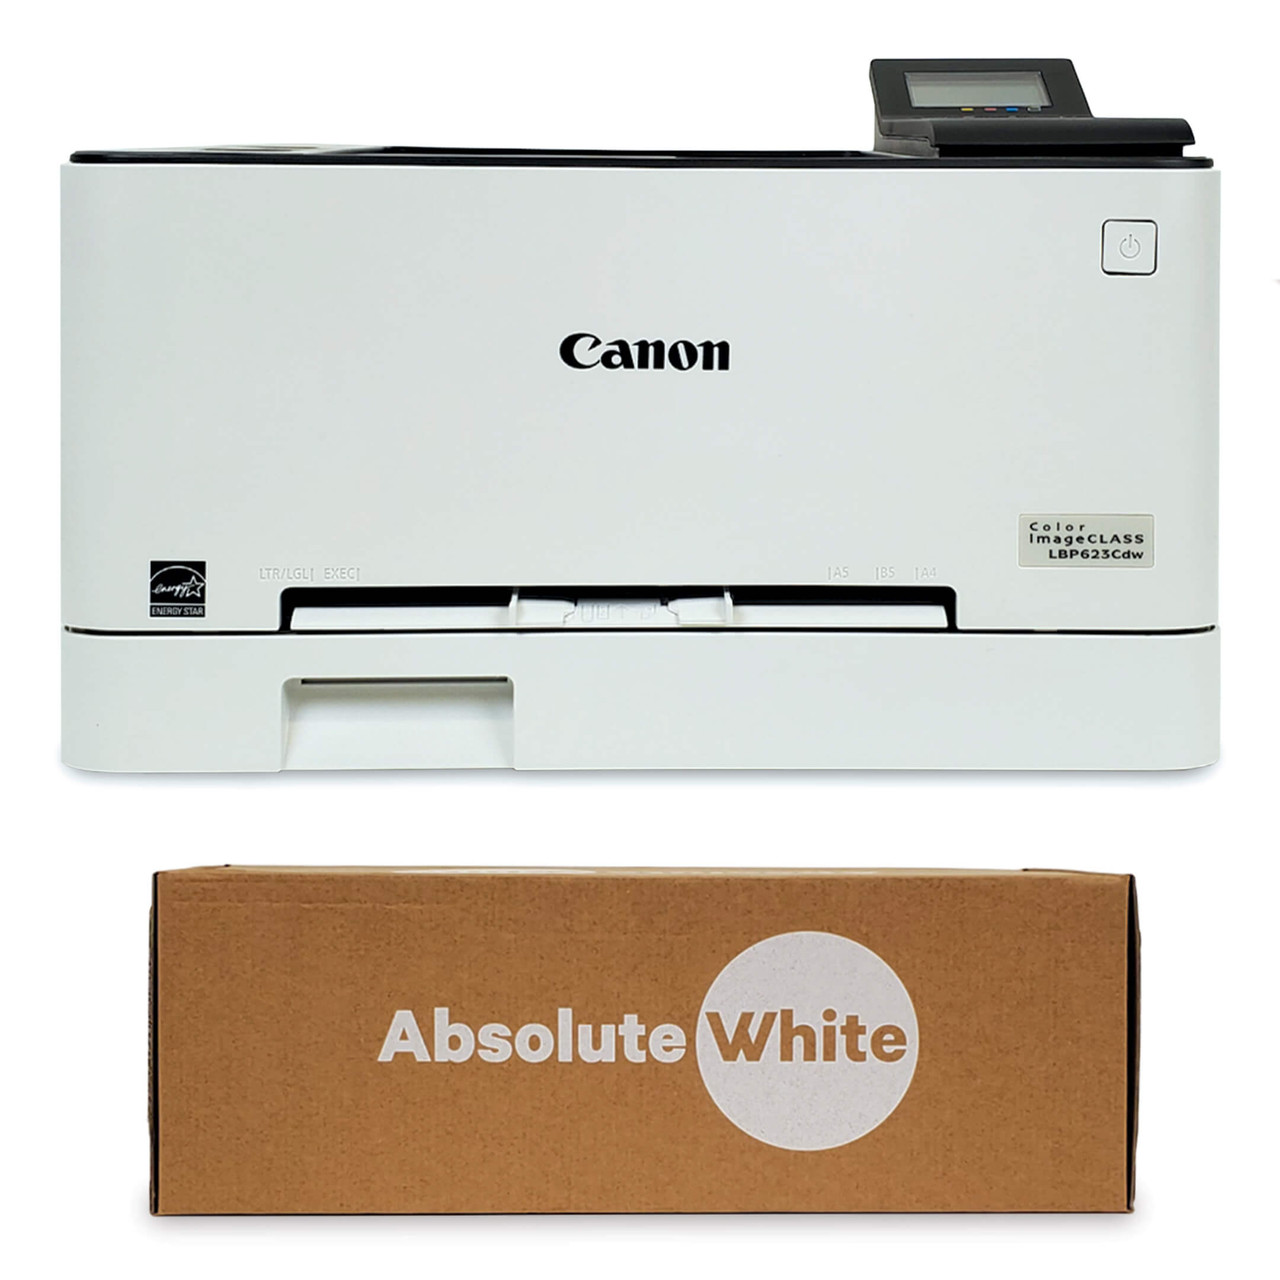 Canon LBP623CDW Color Printer with Absolute White Toner